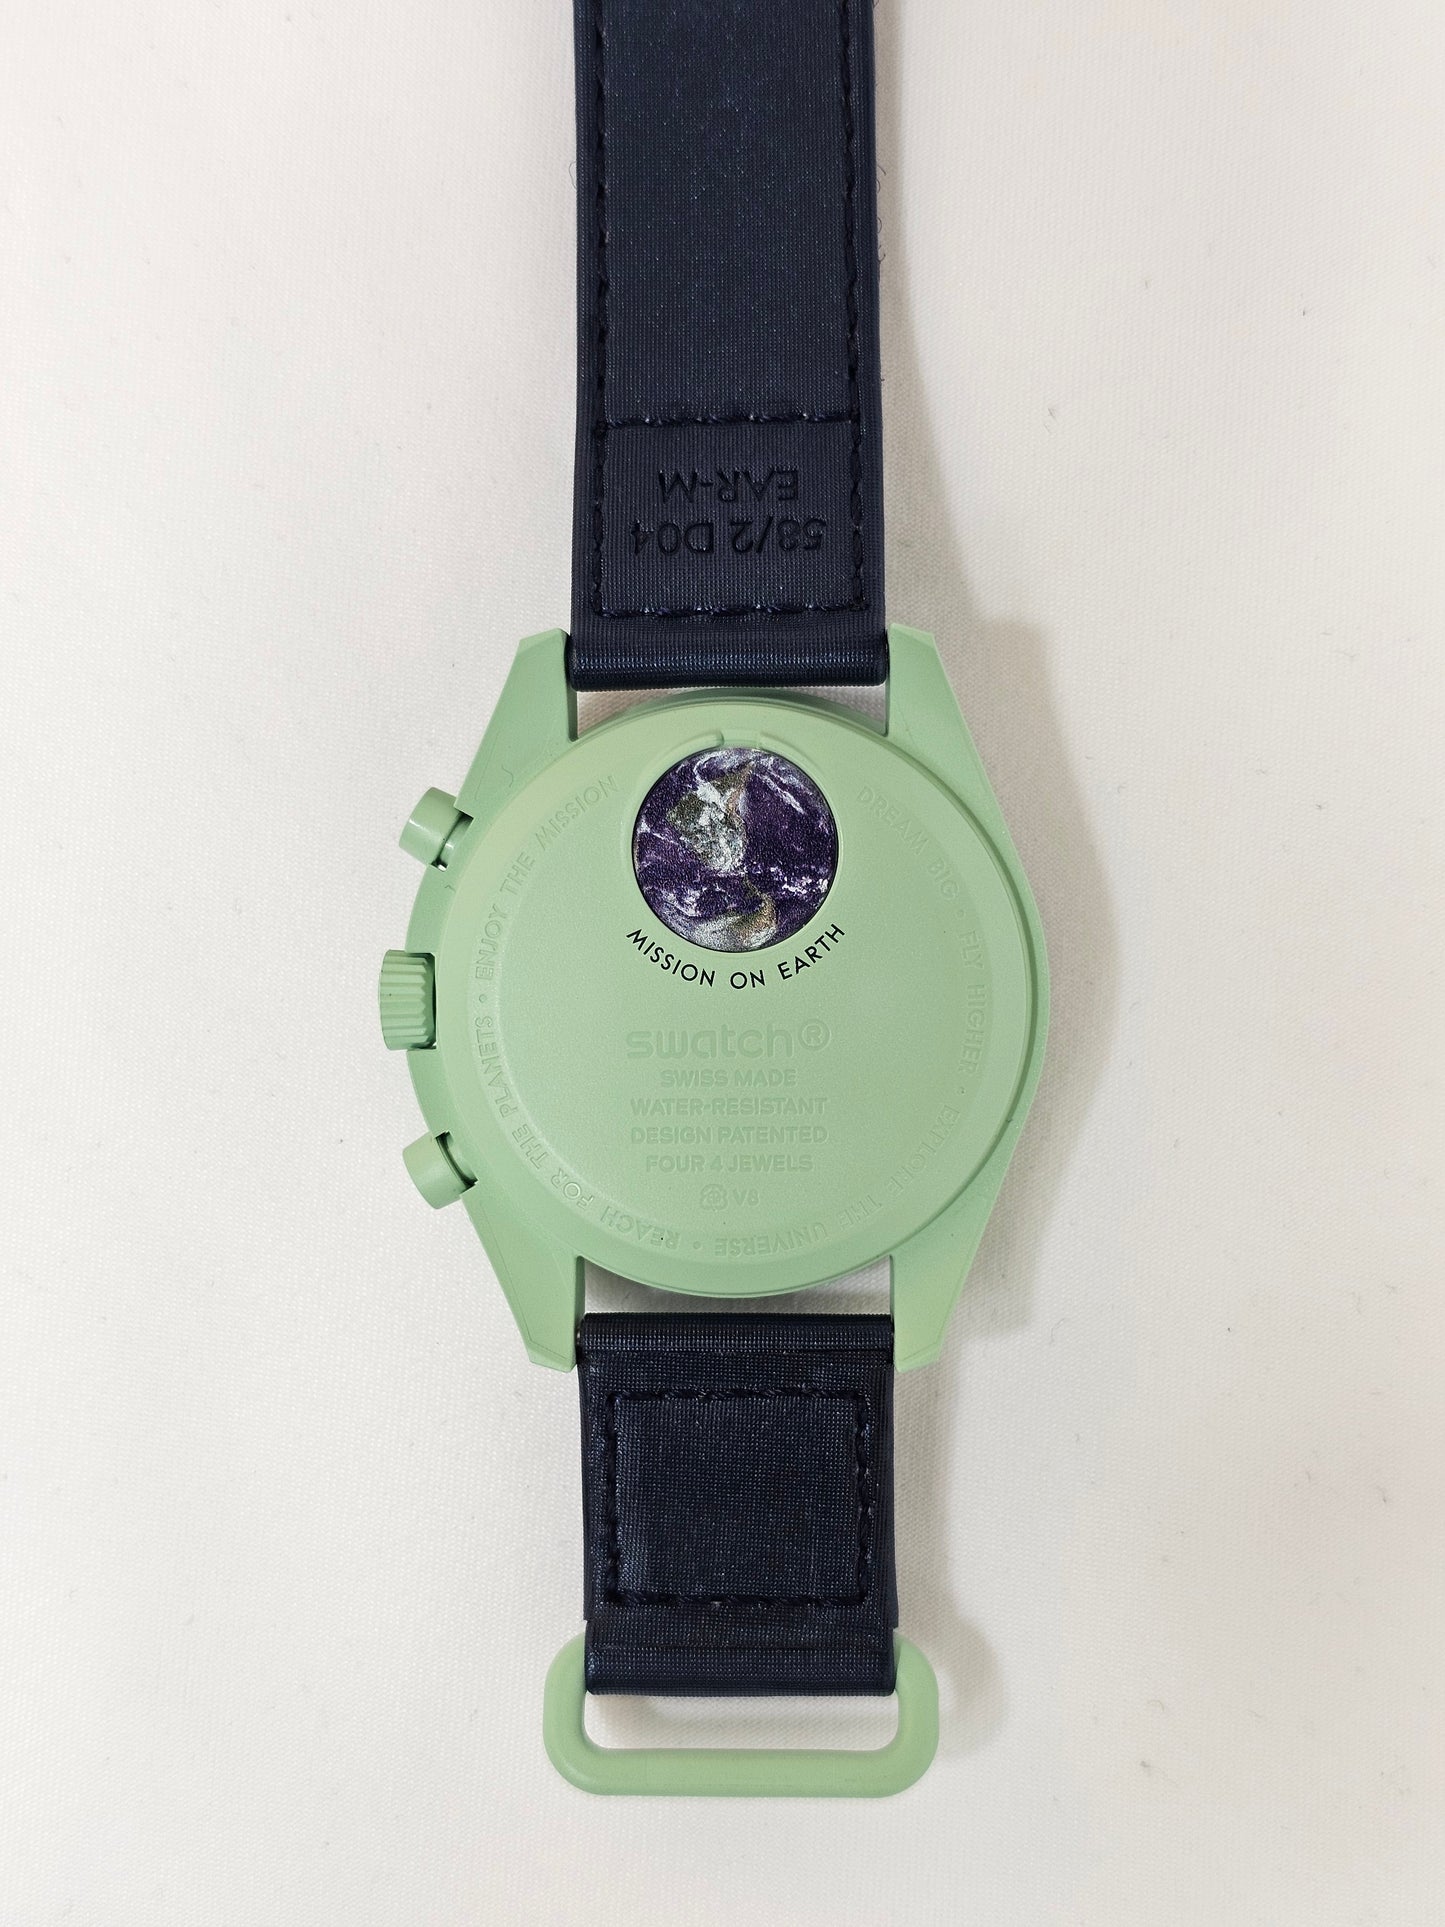 Swatch Moonswatch - Mission on Earth: Embrace Time with a Cosmic Touch